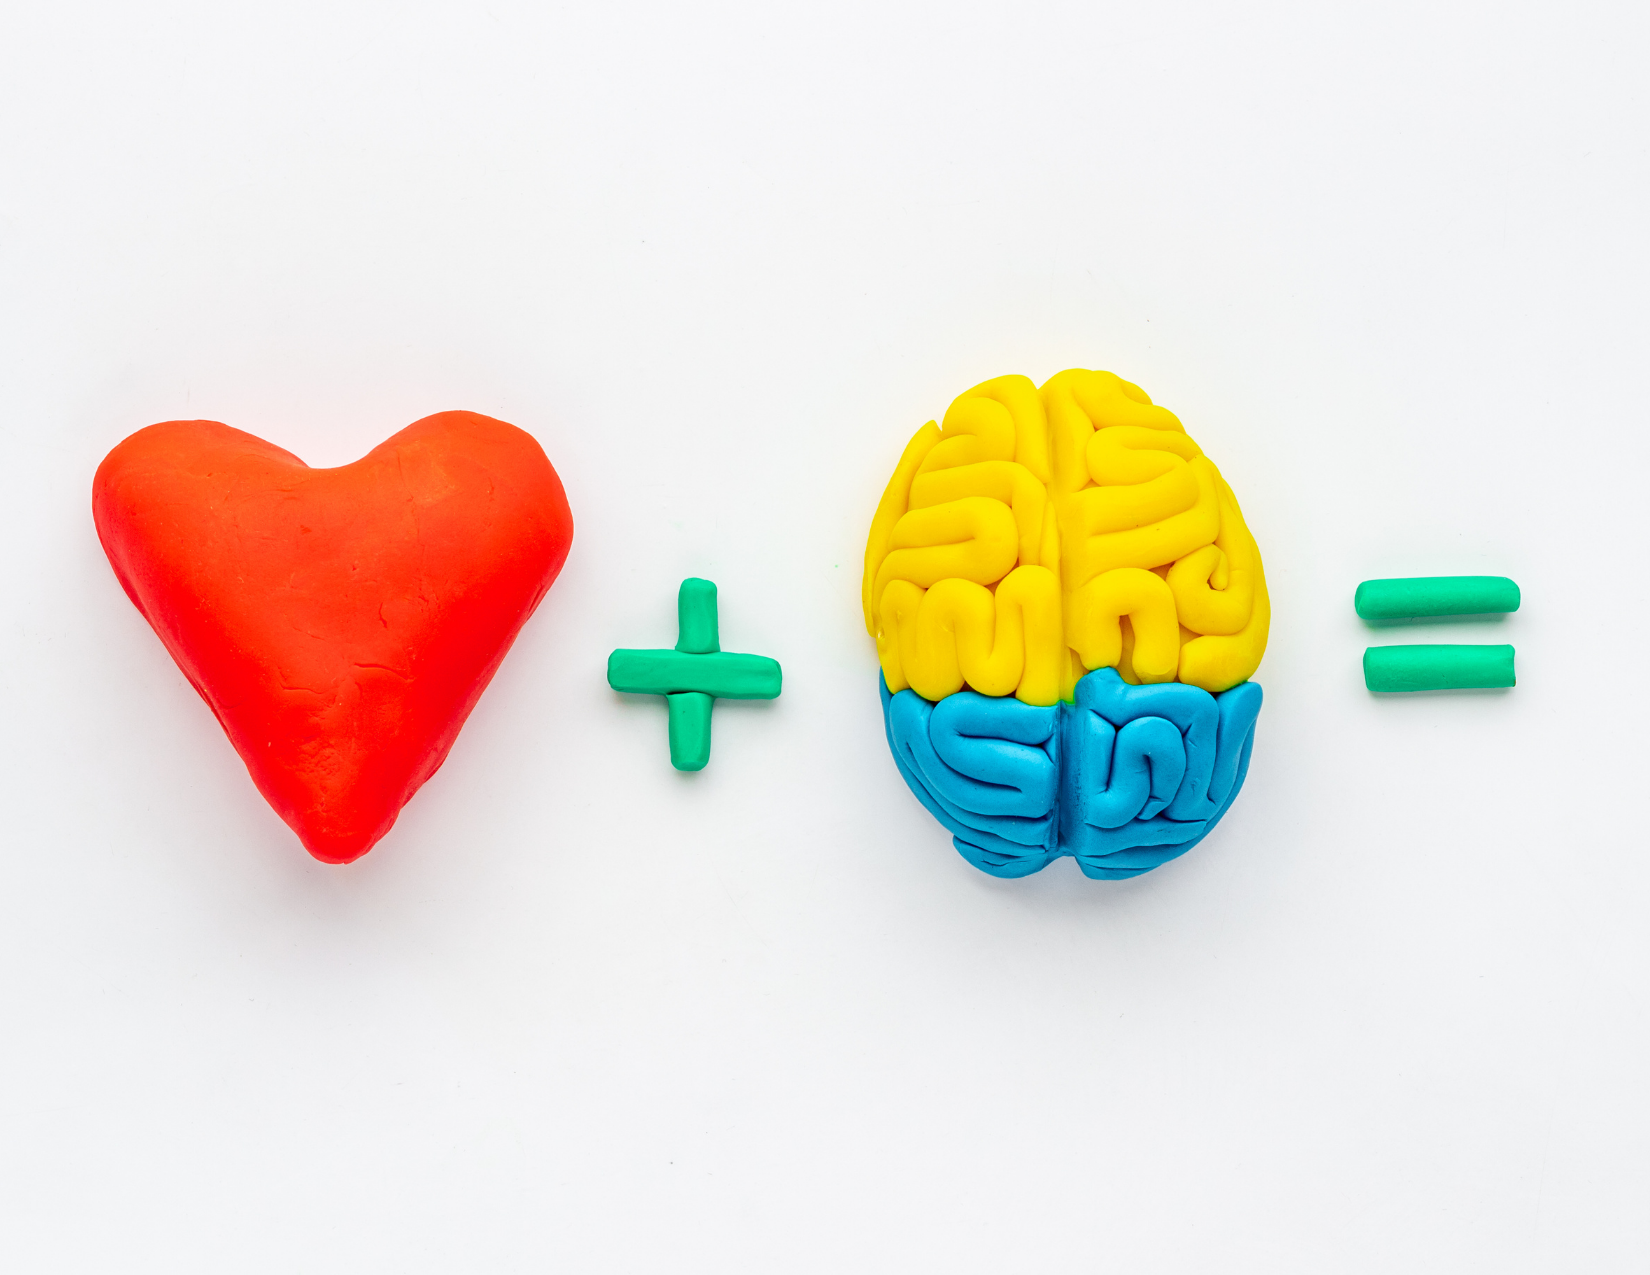 Why Emotional Intelligence Should Matter to Your Organization